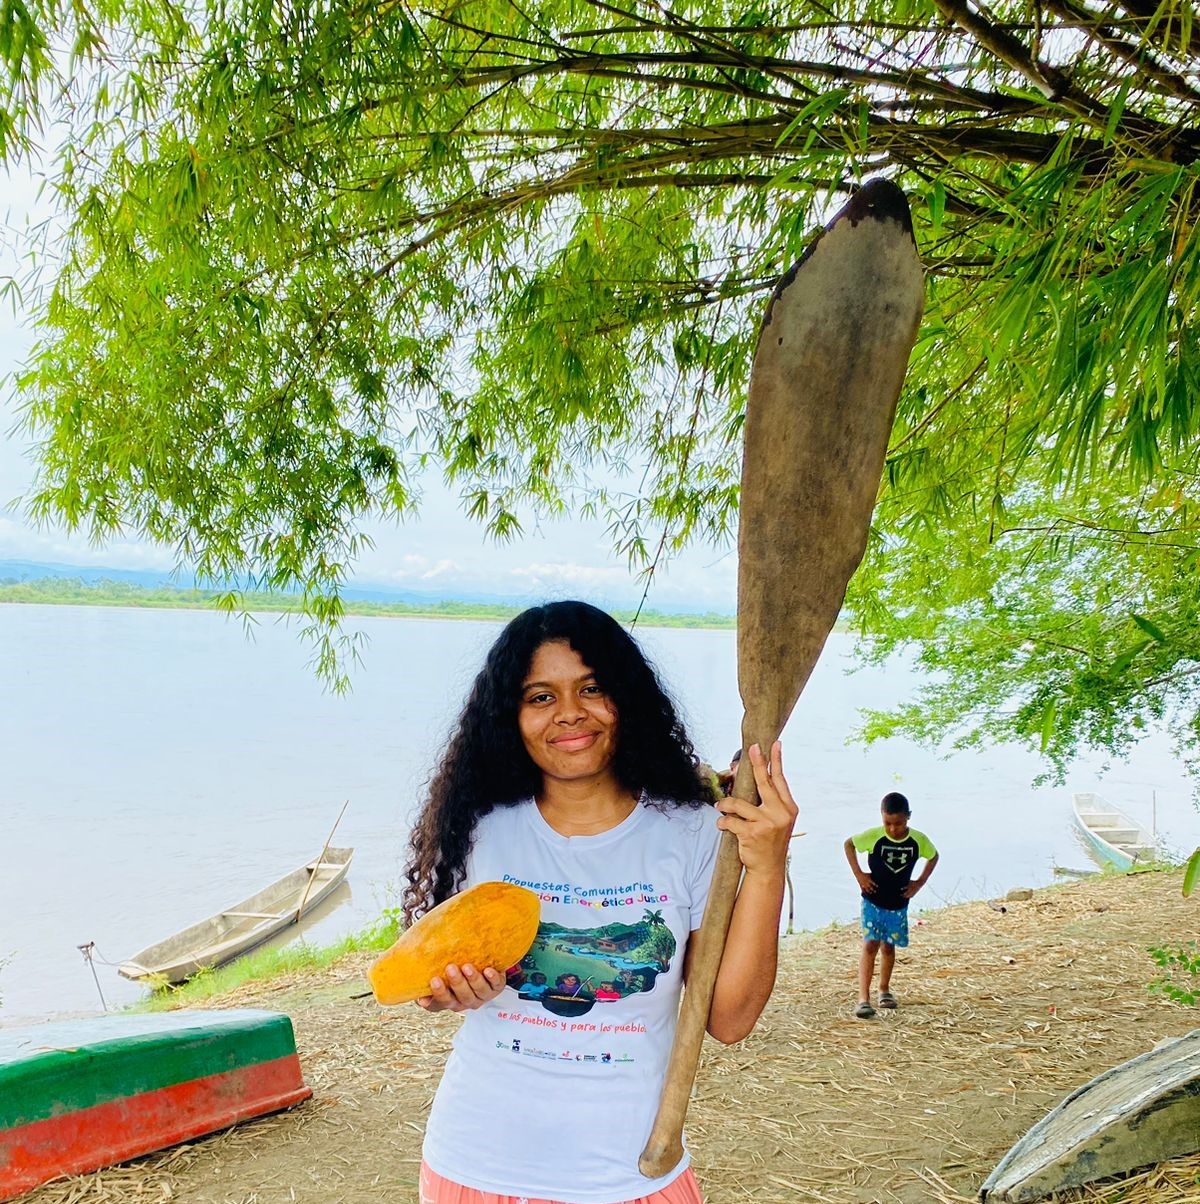 Yuvelis Morales beside the river holding a paddle and a papaya